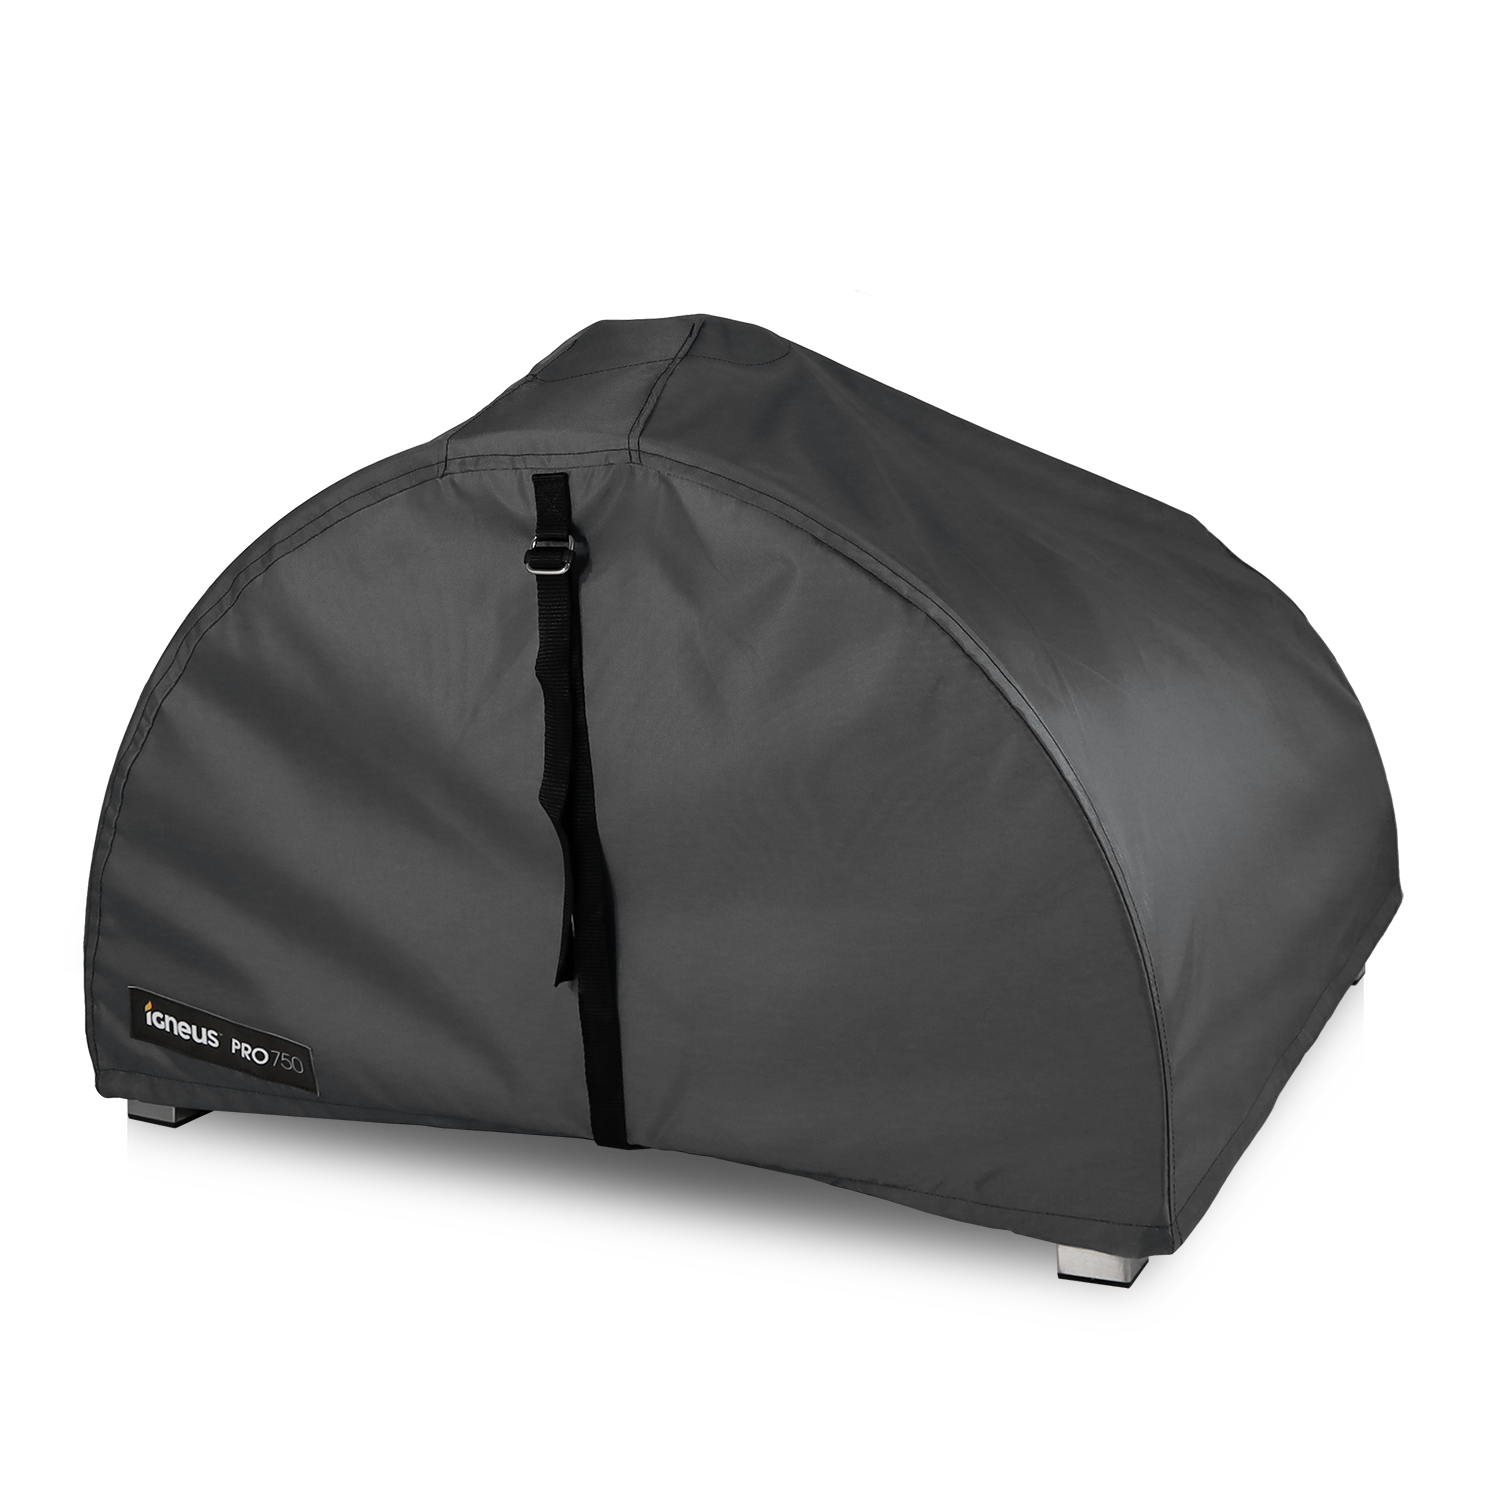 Igneus Pro 750 wood fired pizza oven cover